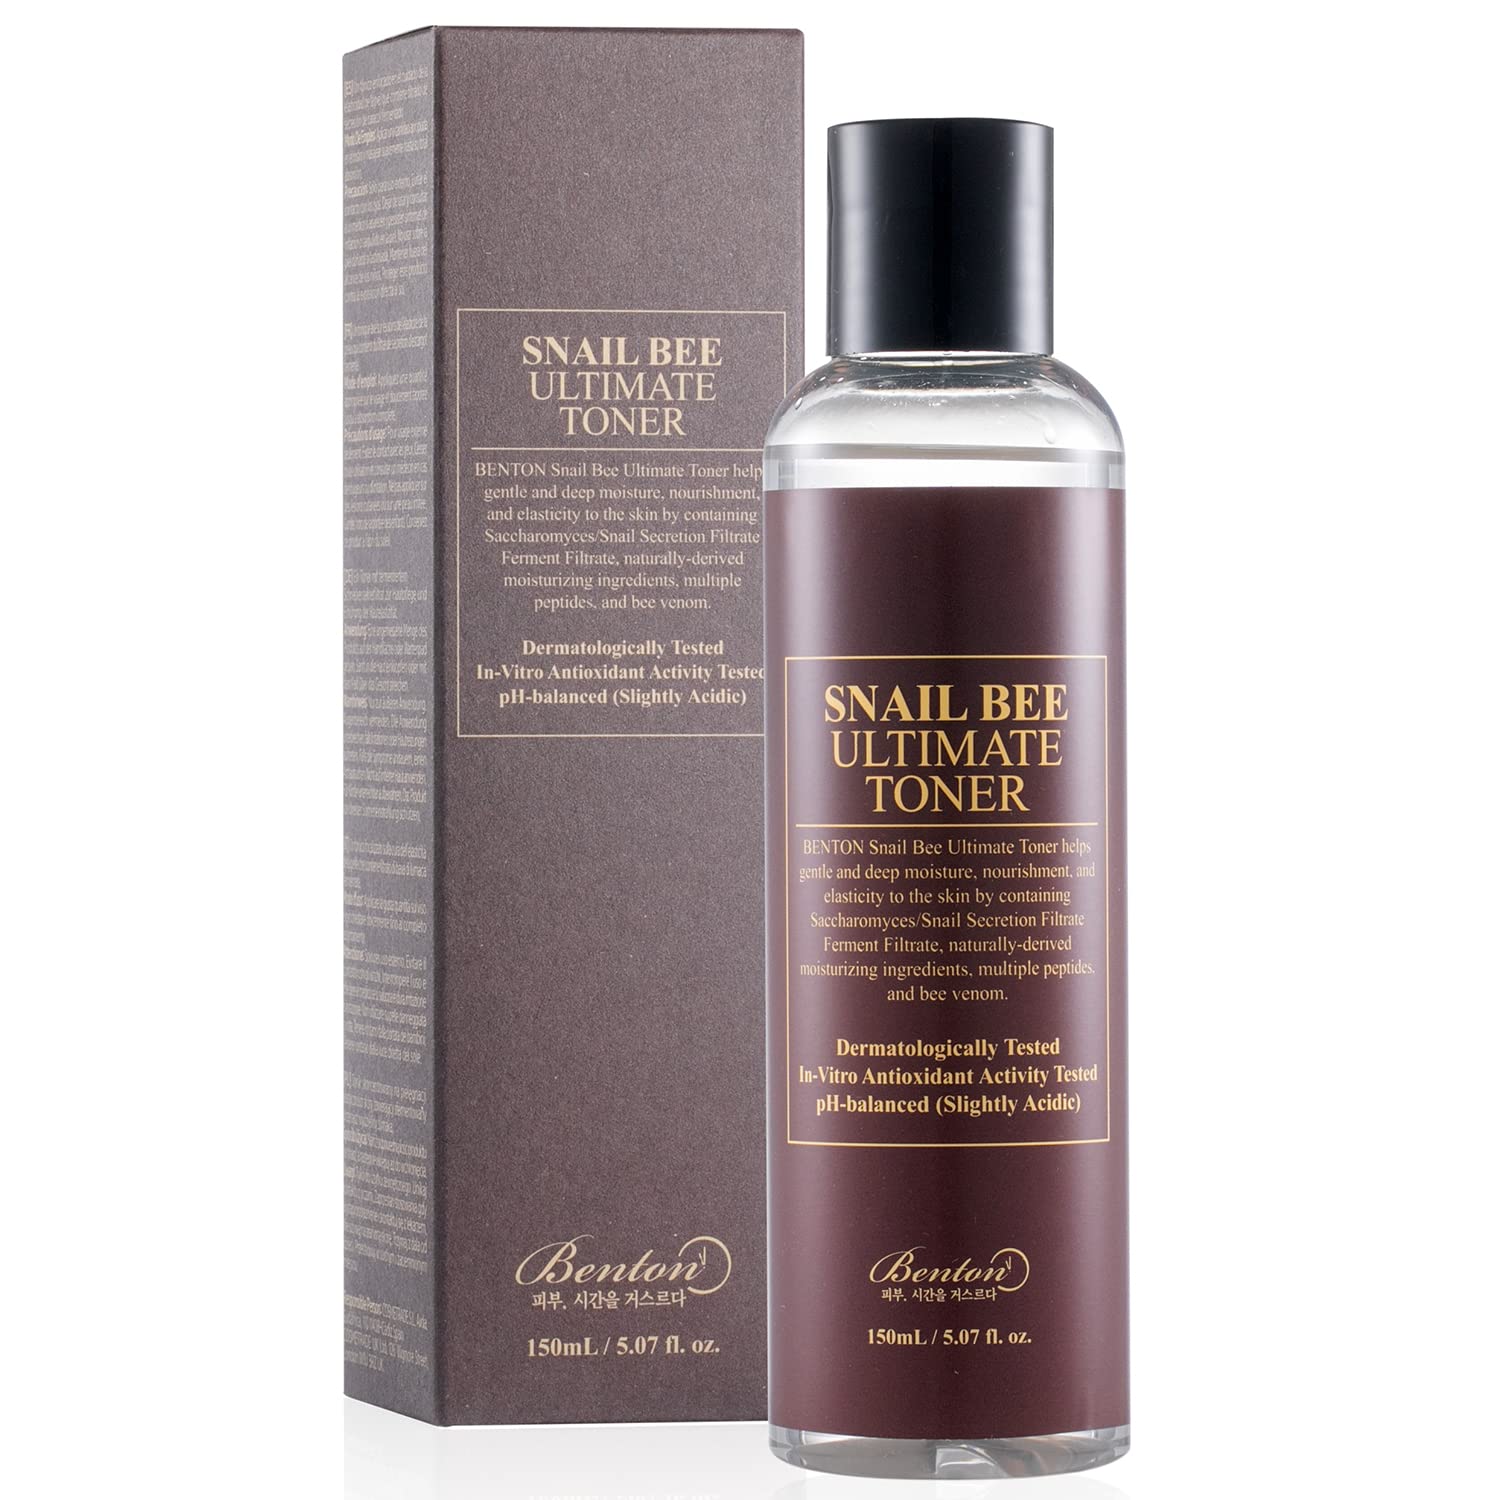 BENTON Snail Bee Ultimate Toner - Anti Aging Toner with Snail Secretion Filtrate - Hydrating & Nourishing Booster to Improve Elasticity and Minimize Wrinkles - Fragrance-Free, 5.07 .